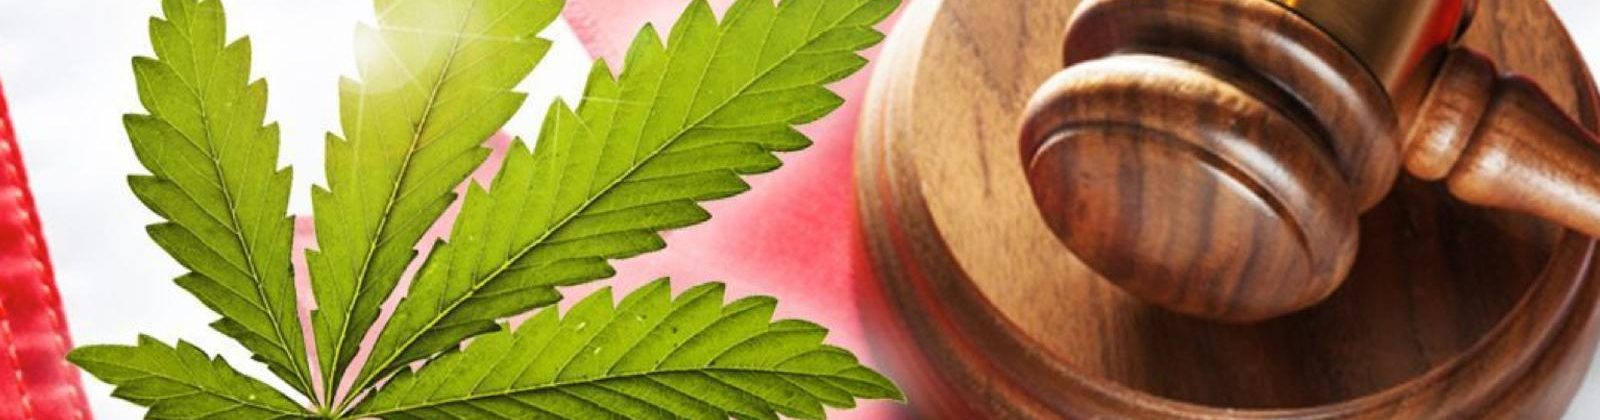 Cannabis GXP Compliance Solution and Management